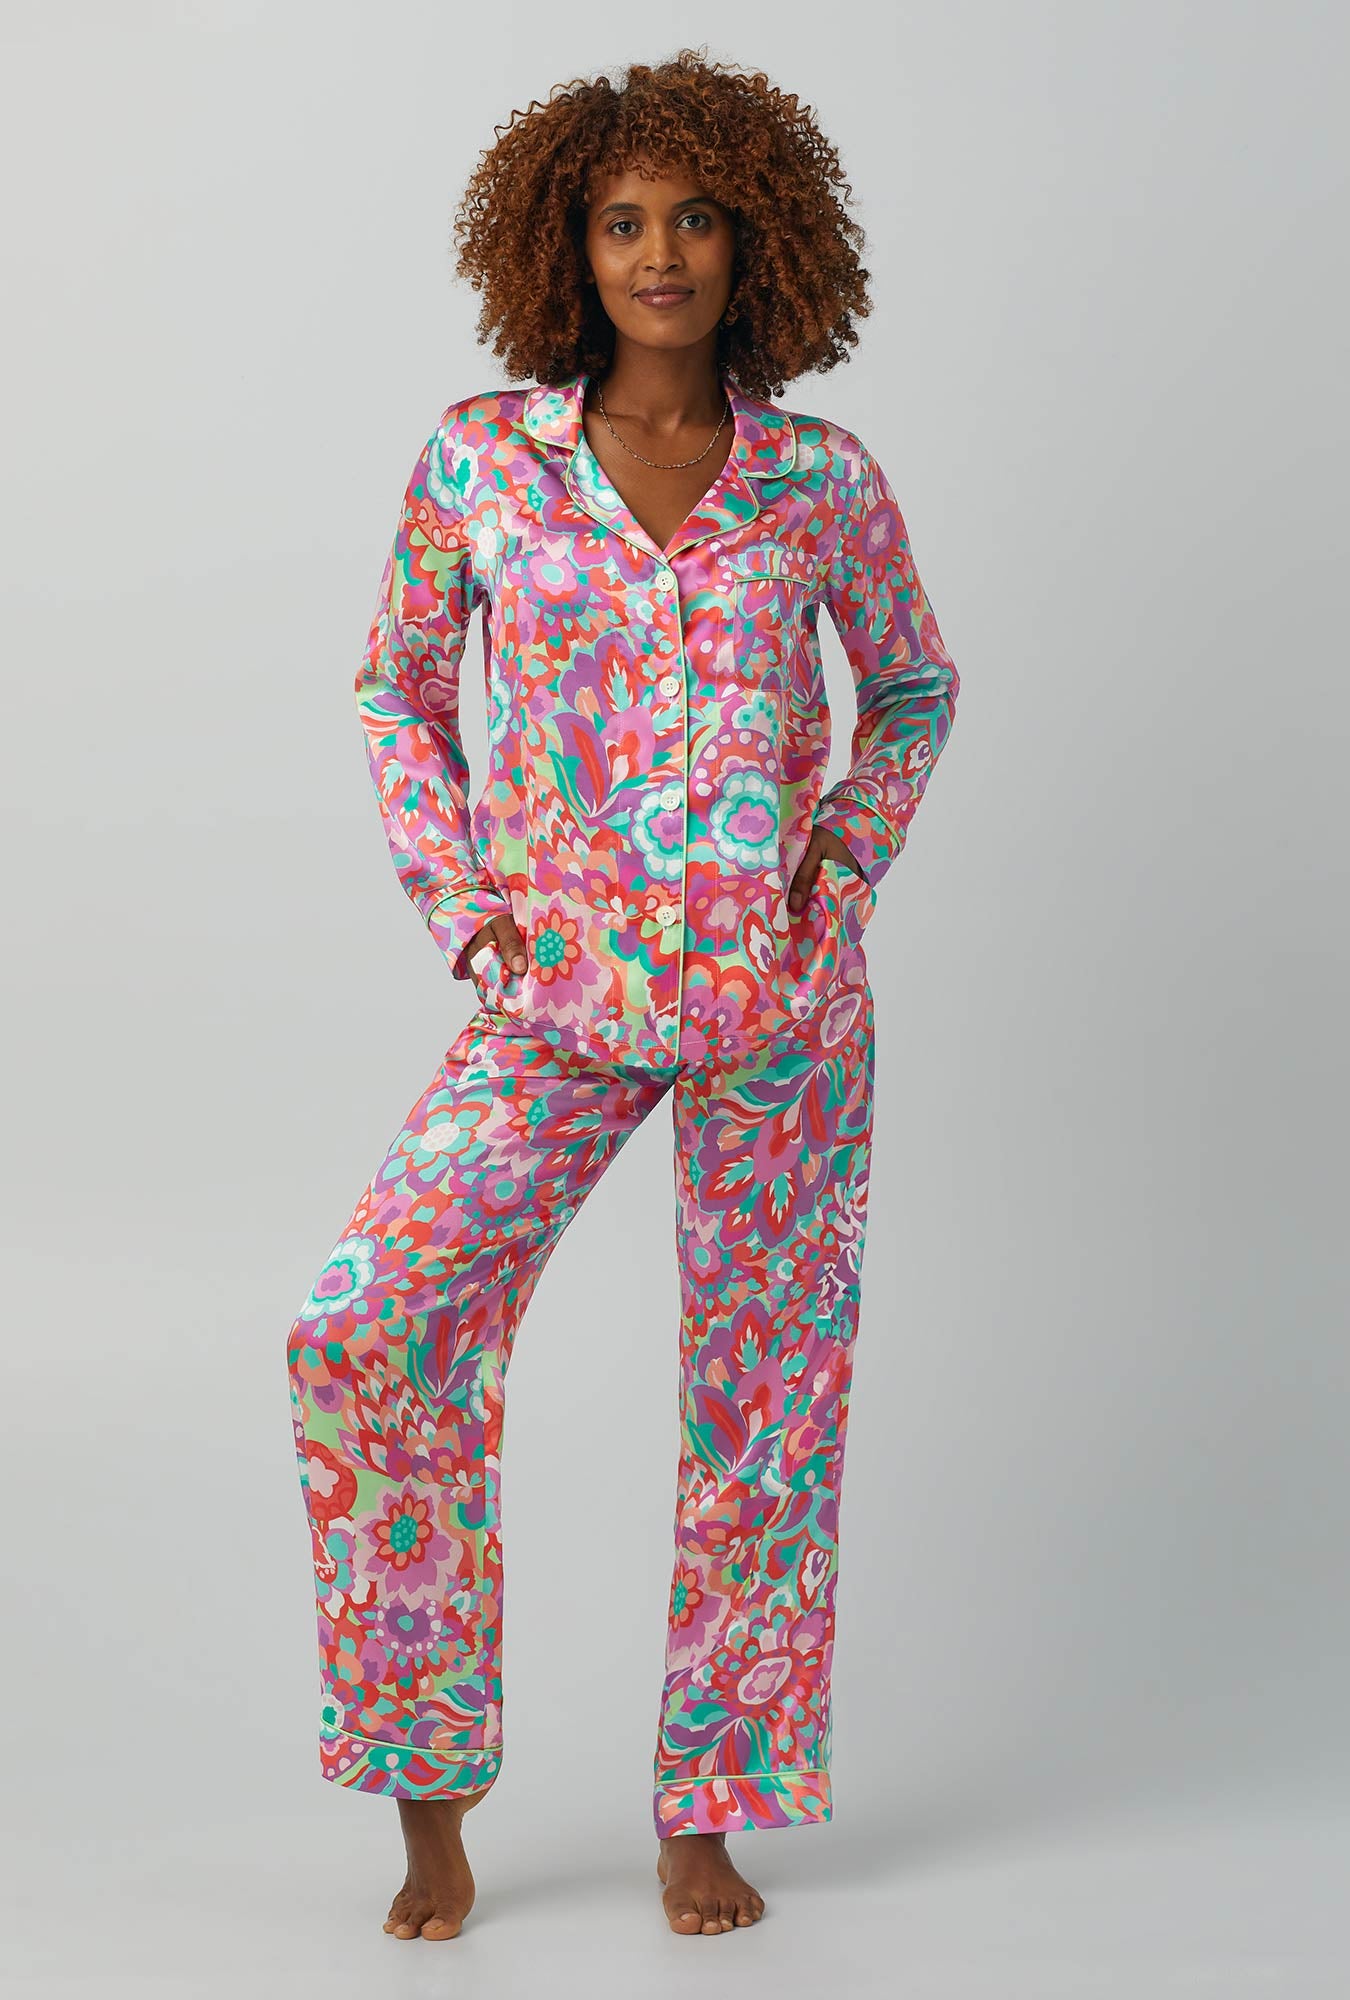 A lady wearing Long Sleeve Classic Washable Silk PJ Set with summer floral print